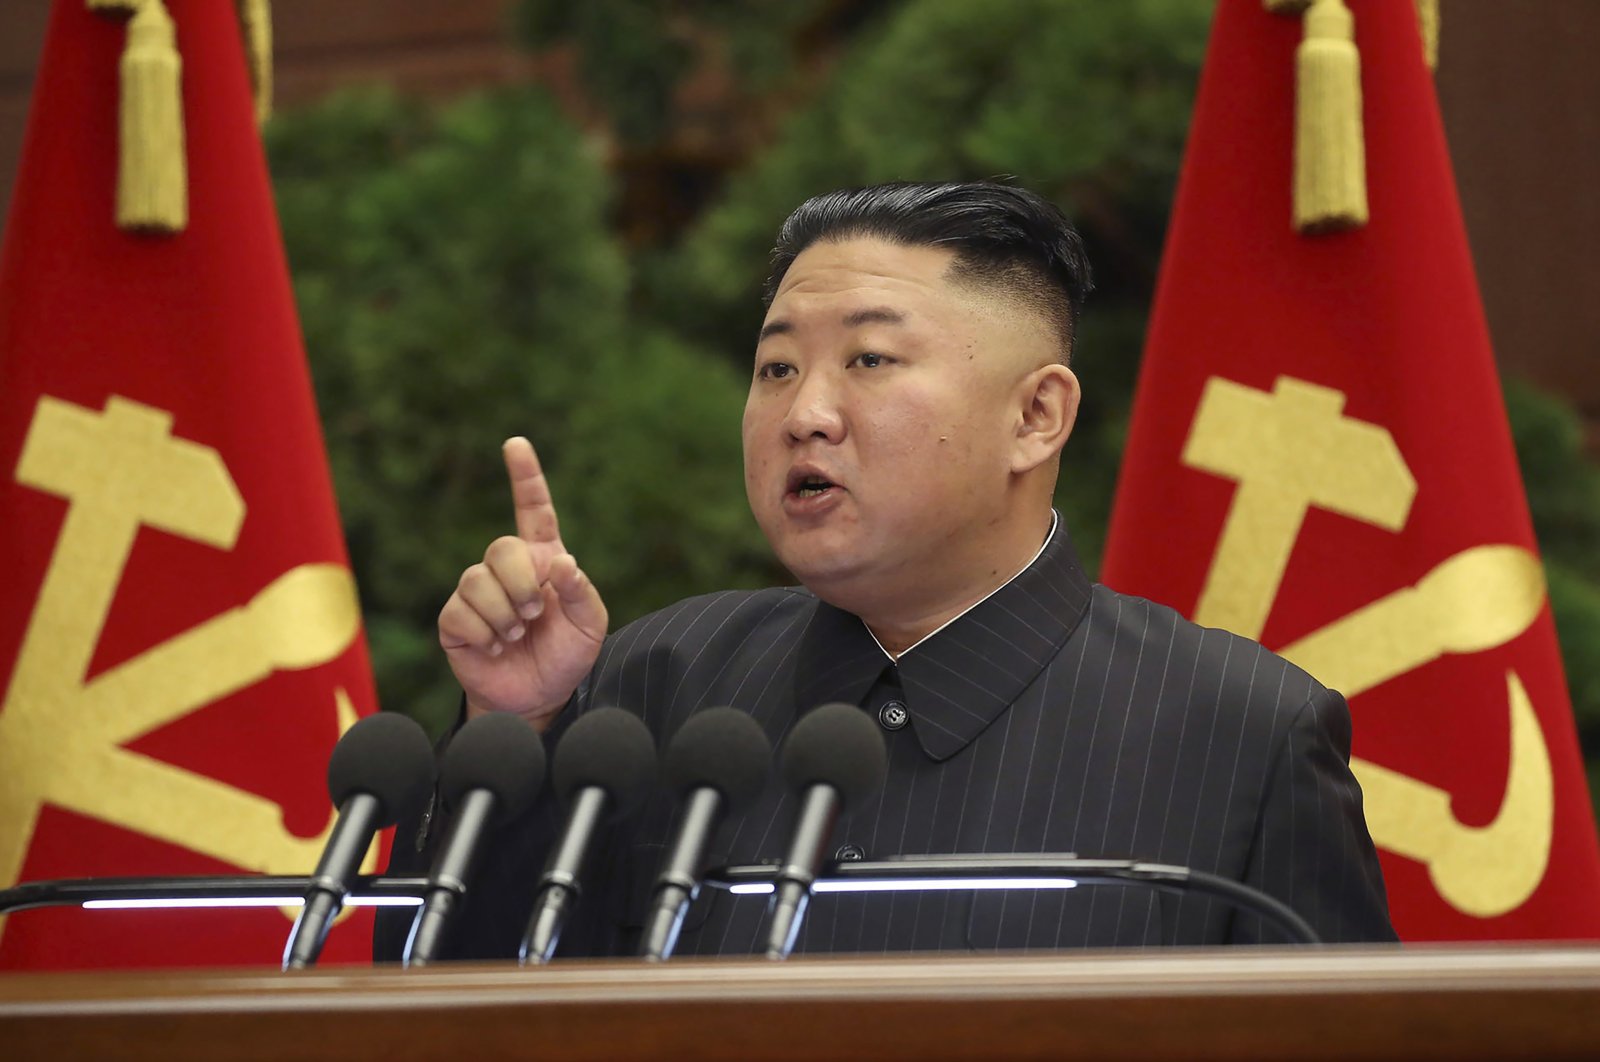 In this file photo provided by the North Korean government, North Korean leader Kim Jong Un speaks during a Politburo meeting of the ruling Workers' Party in Pyongyang, North Korea, June 29, 2021. (Korean Central News Agency/Korea News Service via AP Photo)